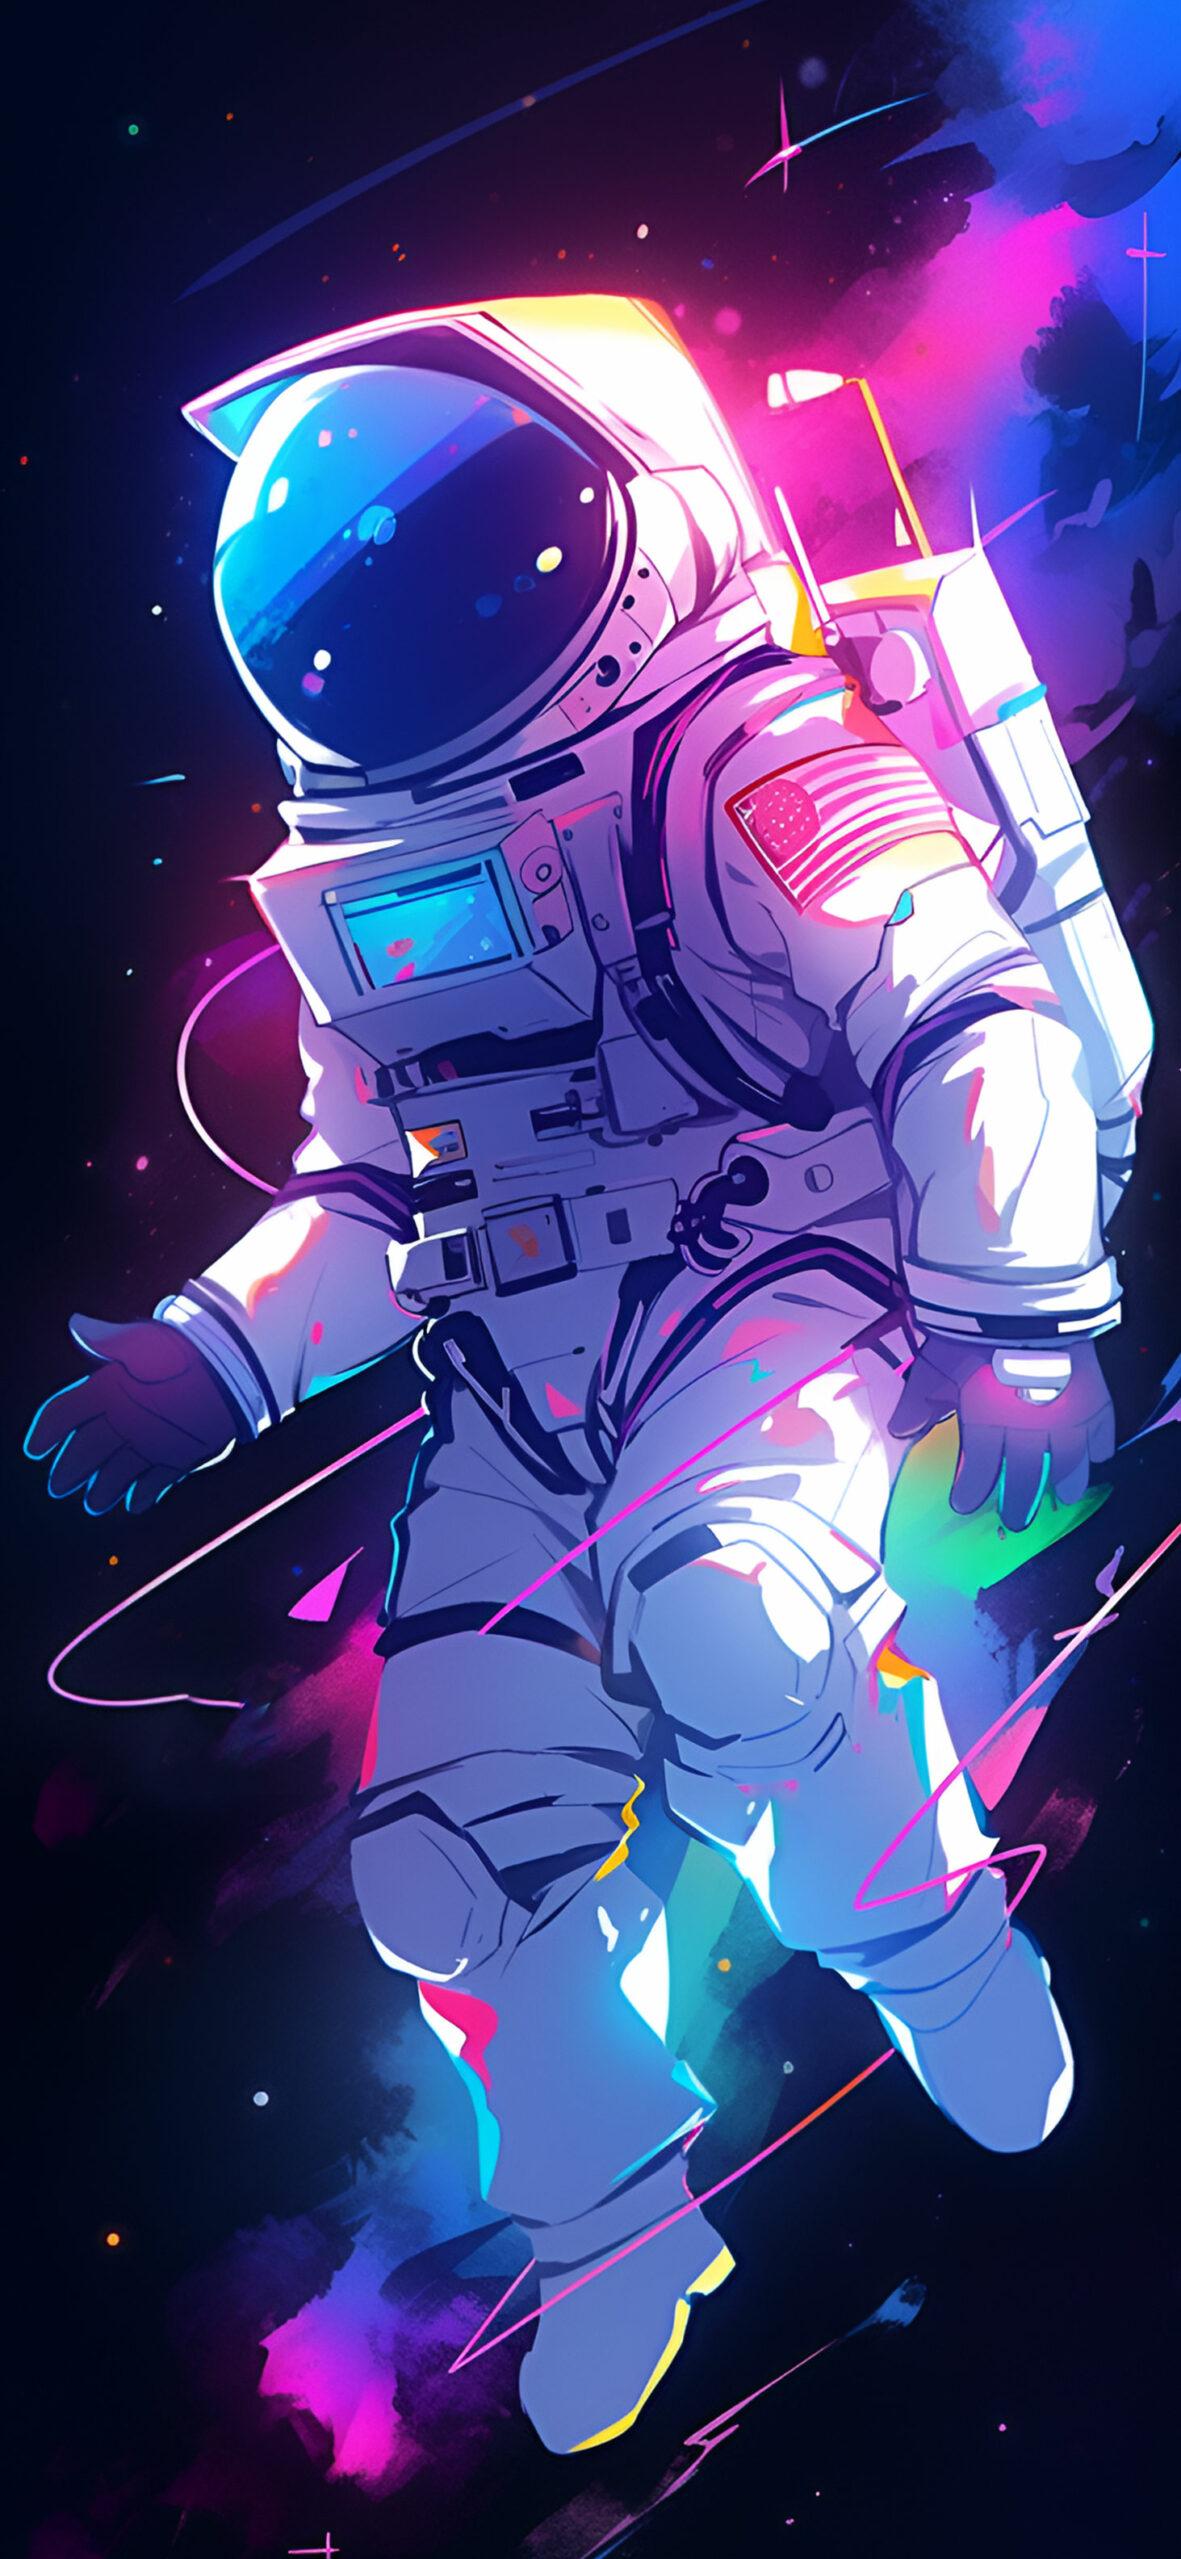 Astronaut In The Space Trippy Wallpaper HD Surreal